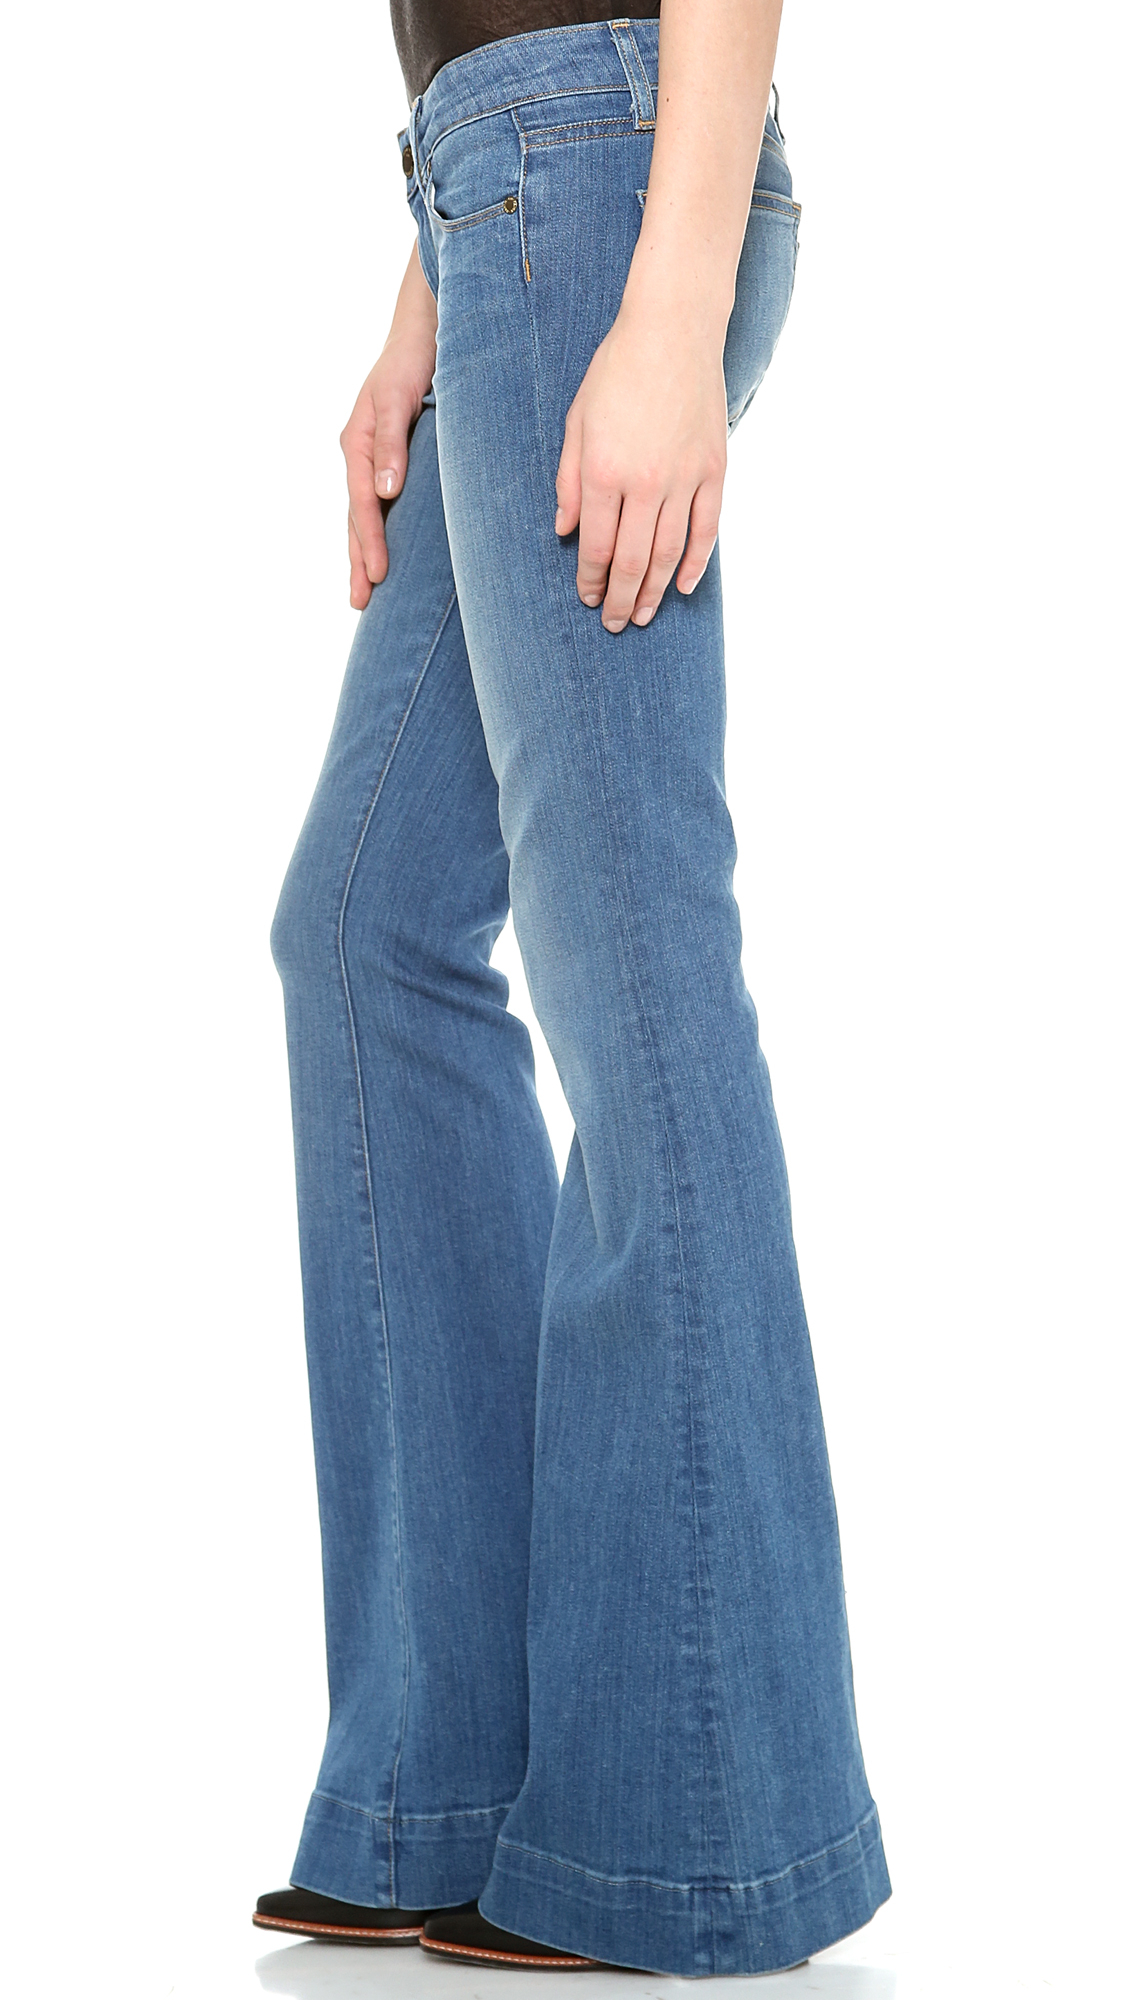 Lyst - Paige Fiona Flare Jeans in Blue